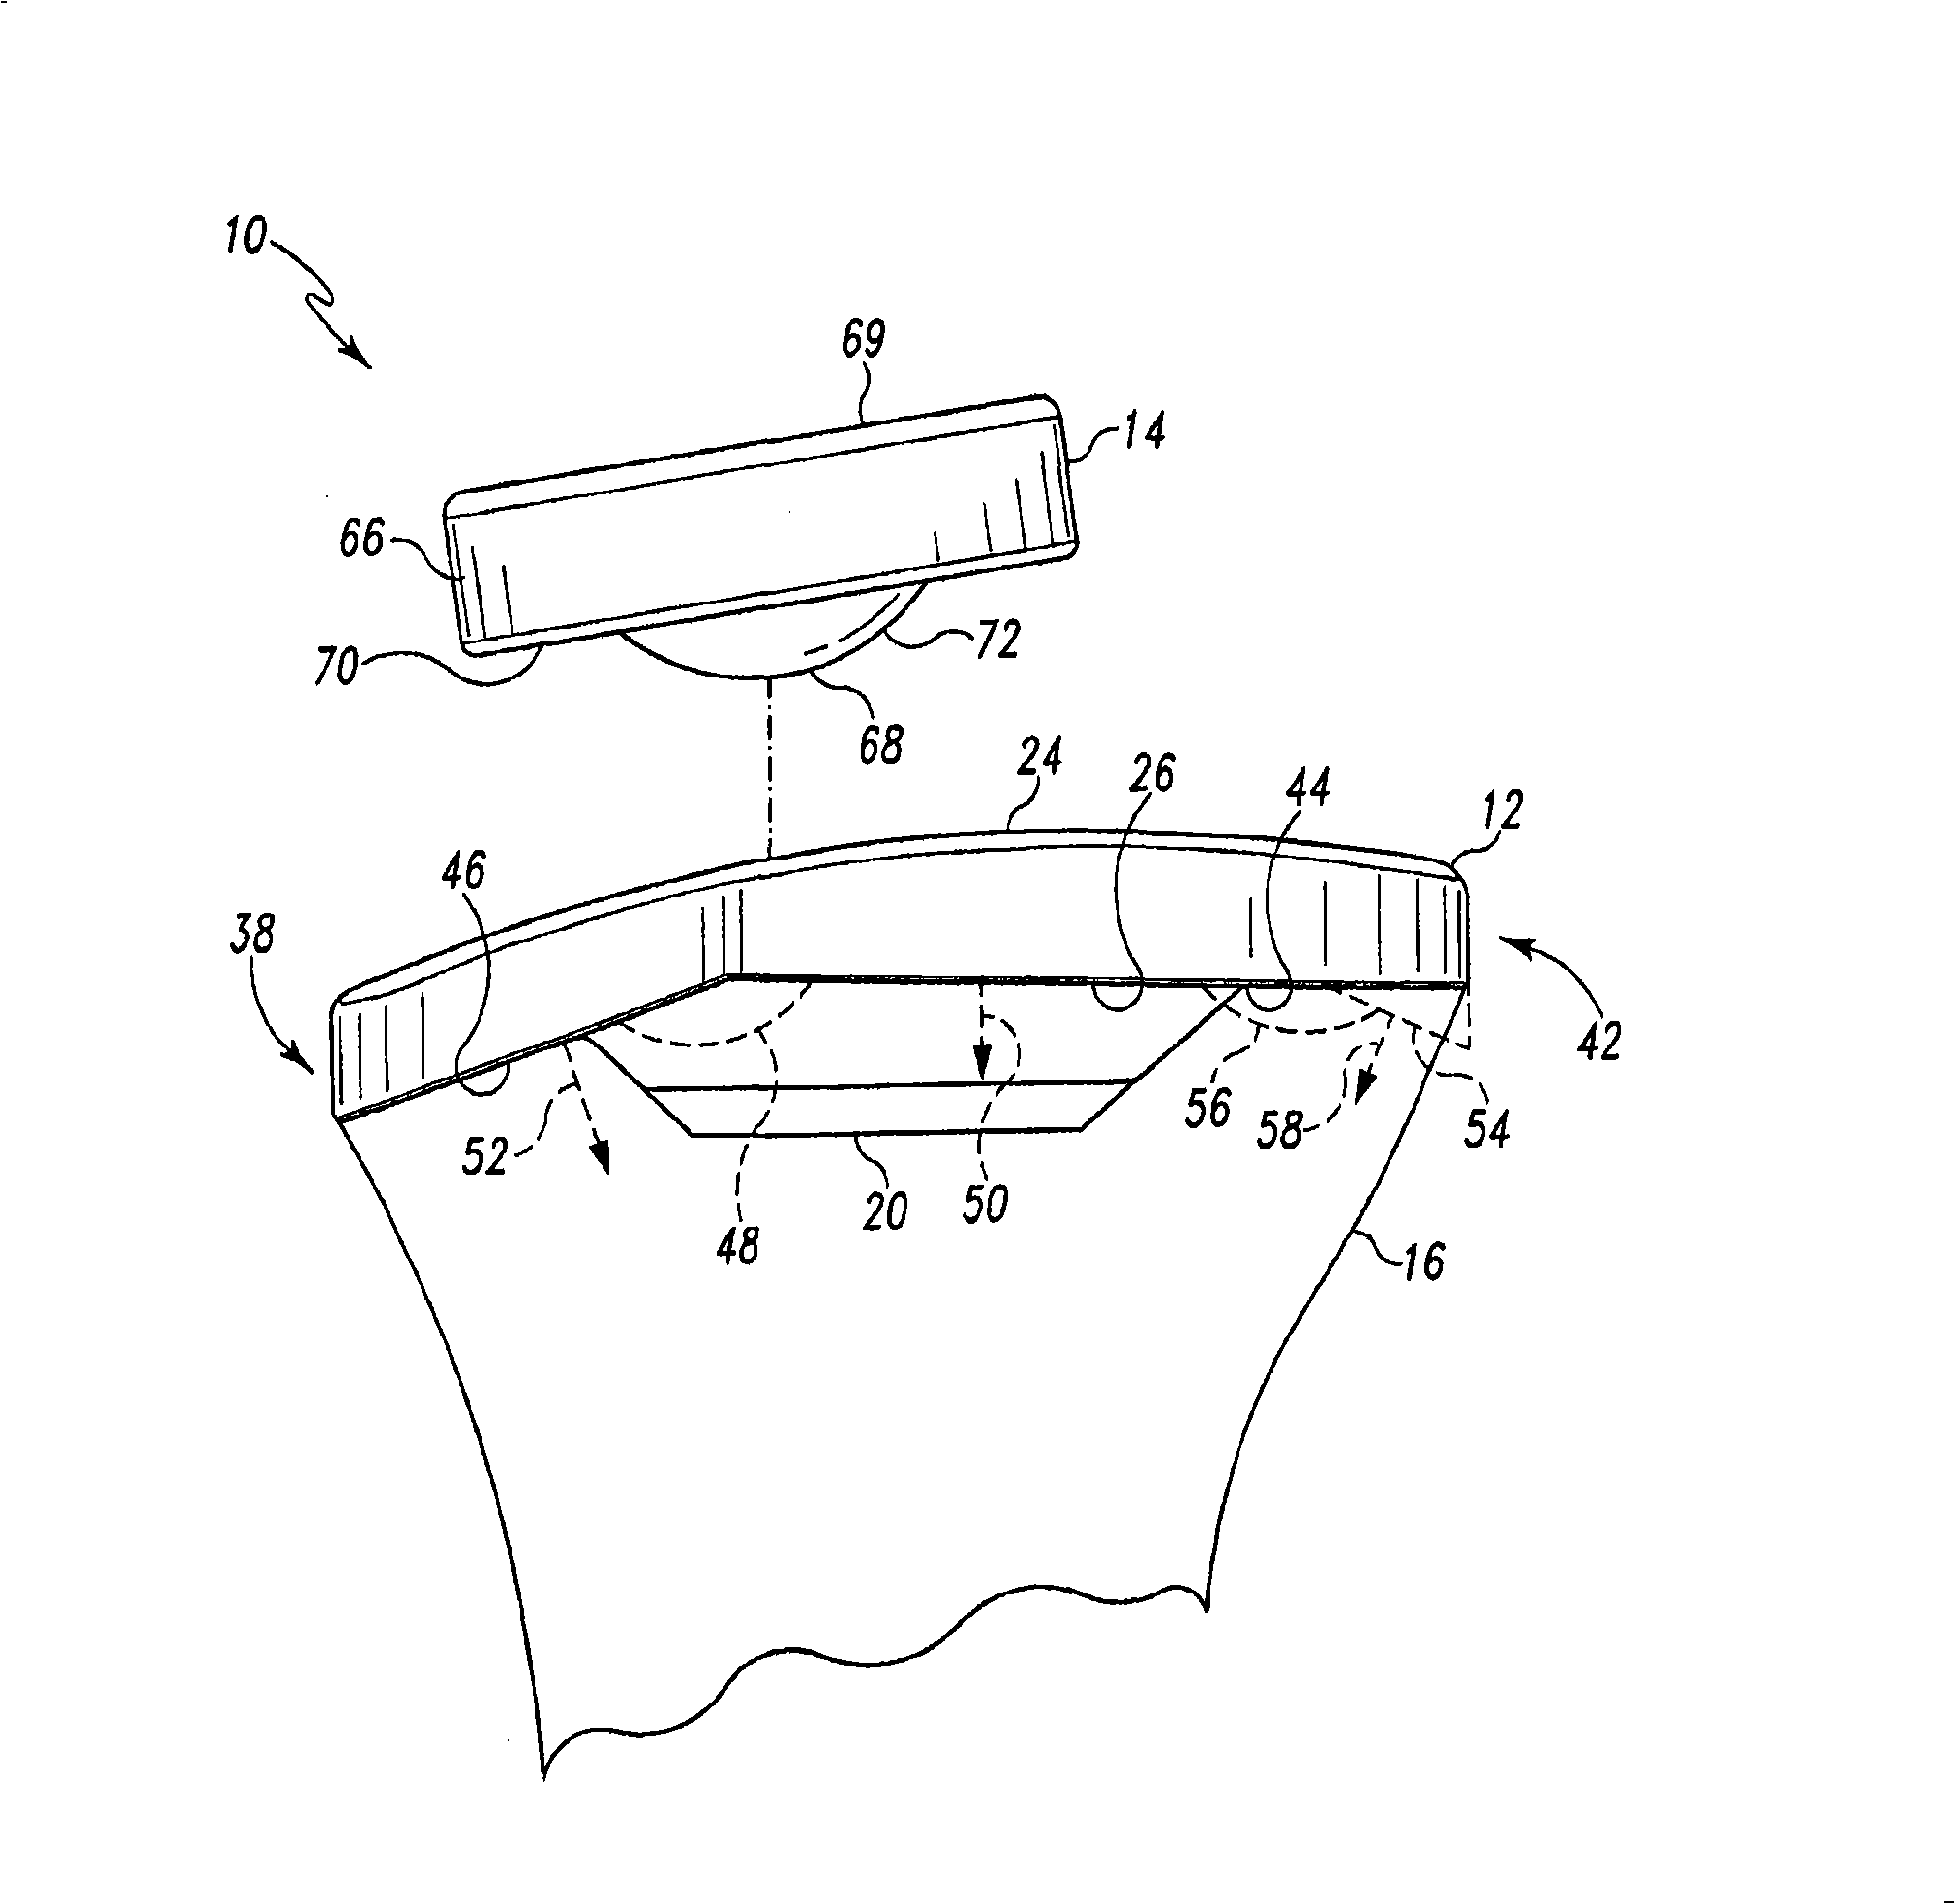 Mobile bearing assembly having a non-planar interface